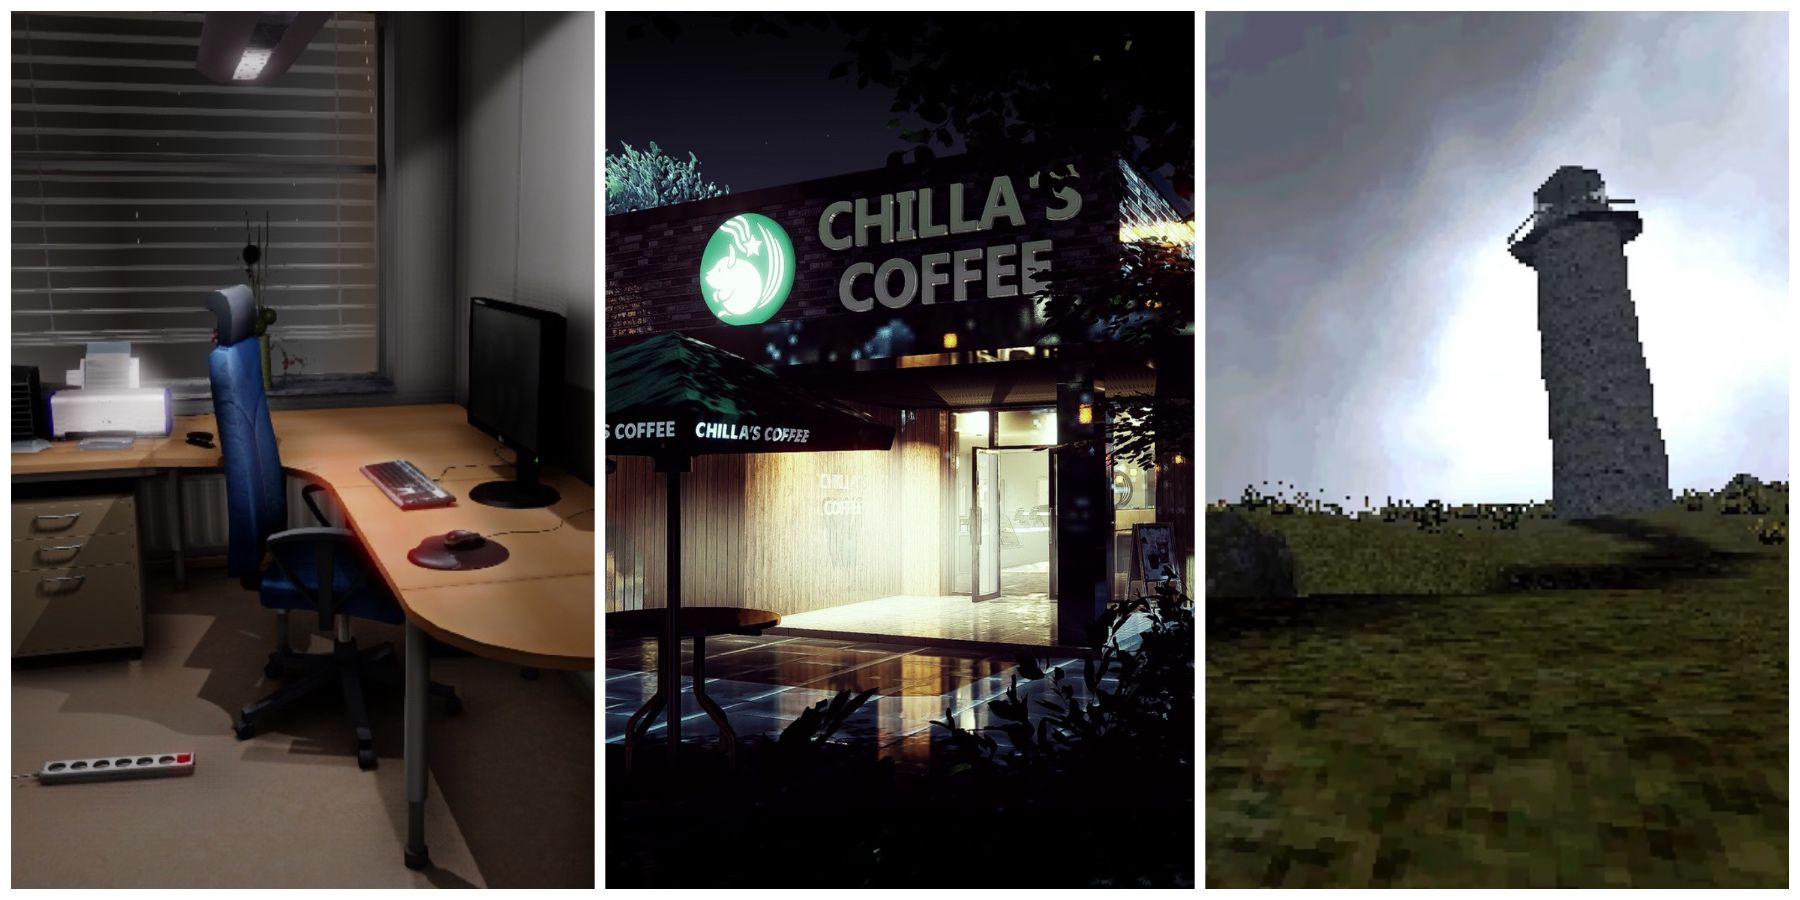 Horror Games About Ordinary Jobs